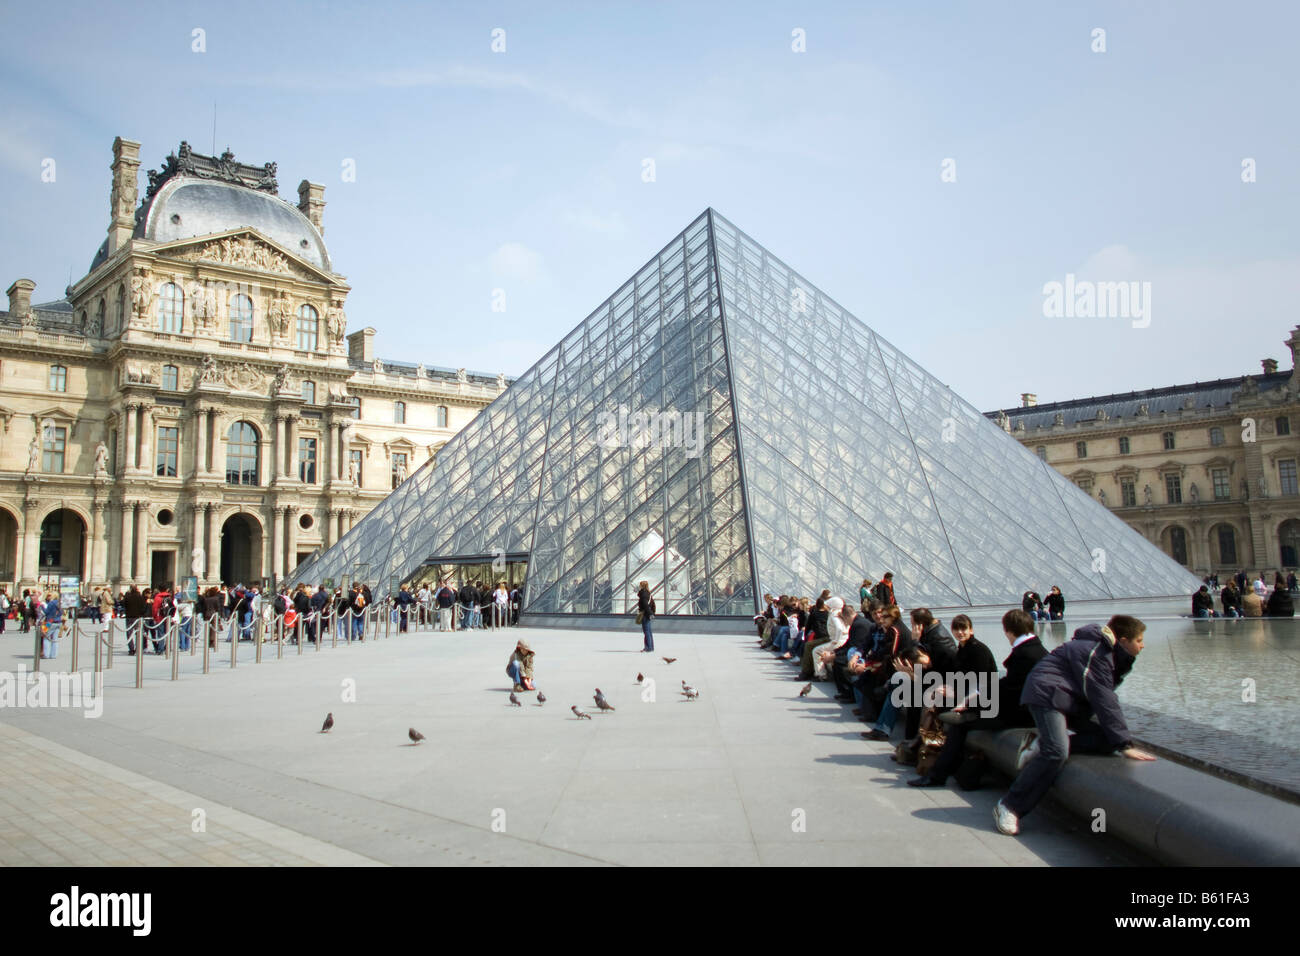 A view of the glass pyramid, designed by architect I.M. Pei, marking an entrance to the Musee du Louvre in Paris Stock Photo